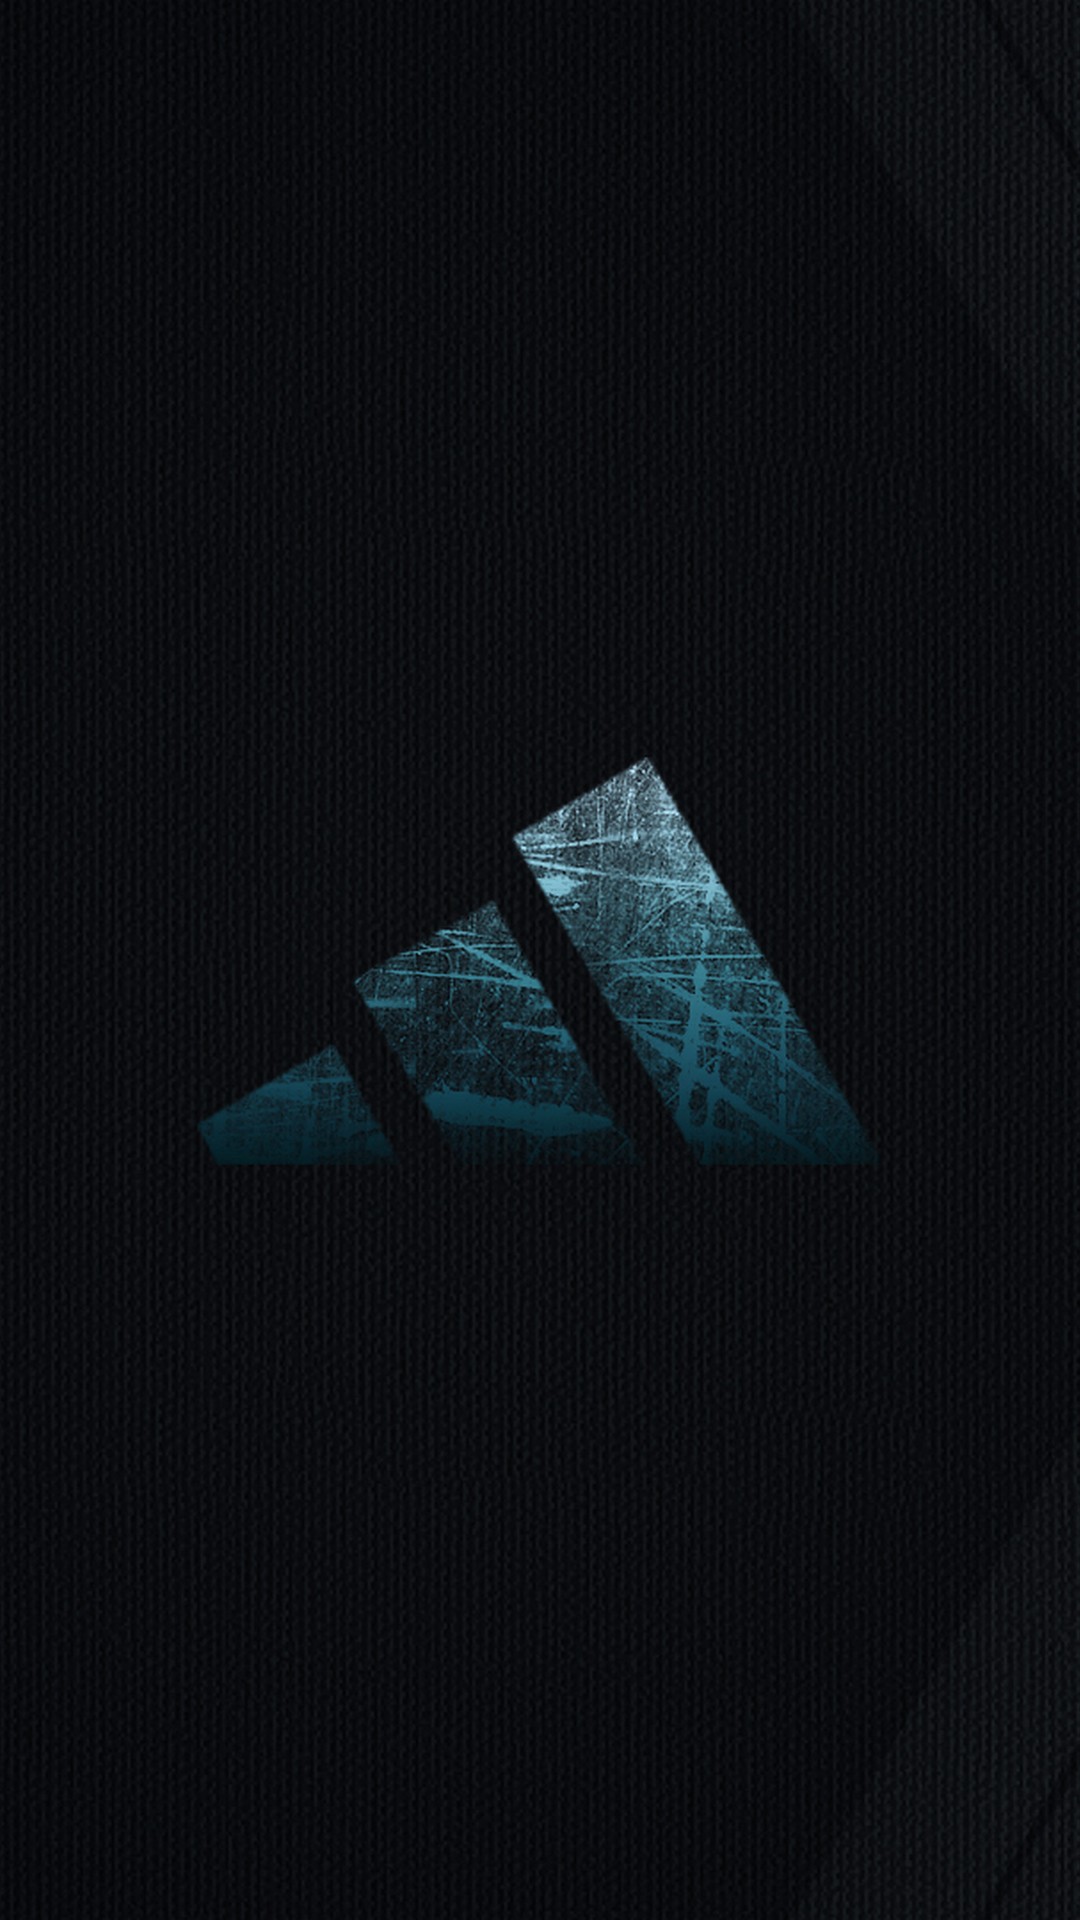 Adidas Logo iPhone X Wallpaper With high-resolution 1080X1920 pixel. You can use this wallpaper for your iPhone 5, 6, 7, 8, X, XS, XR backgrounds, Mobile Screensaver, or iPad Lock Screen